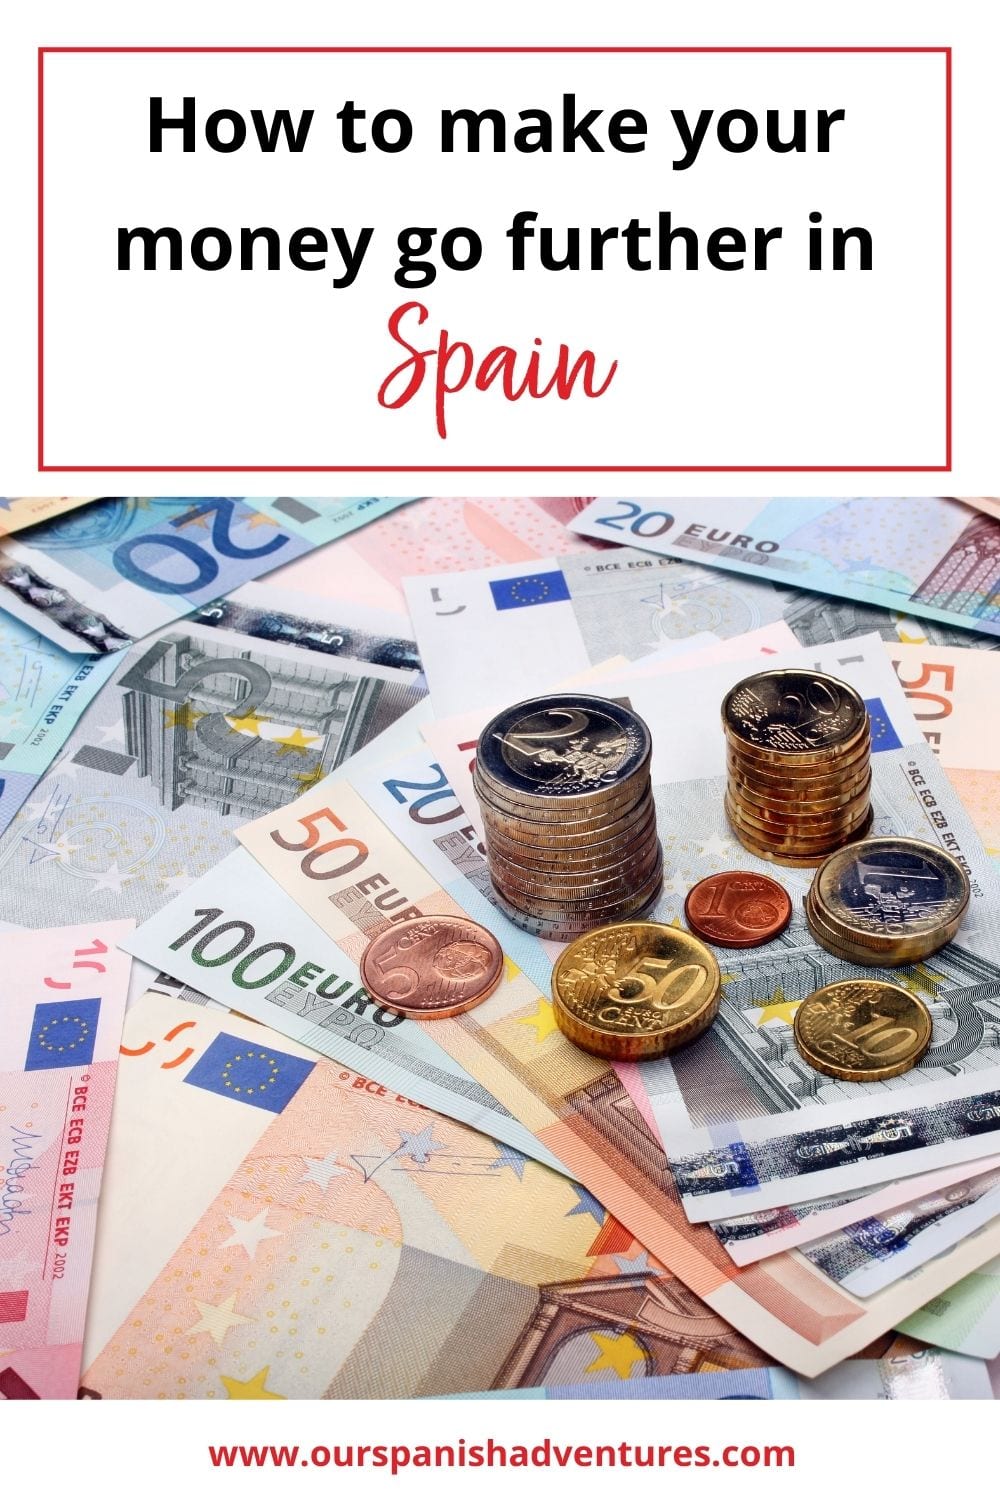 How to make your money go further in Spain | Our Spanish Adventures